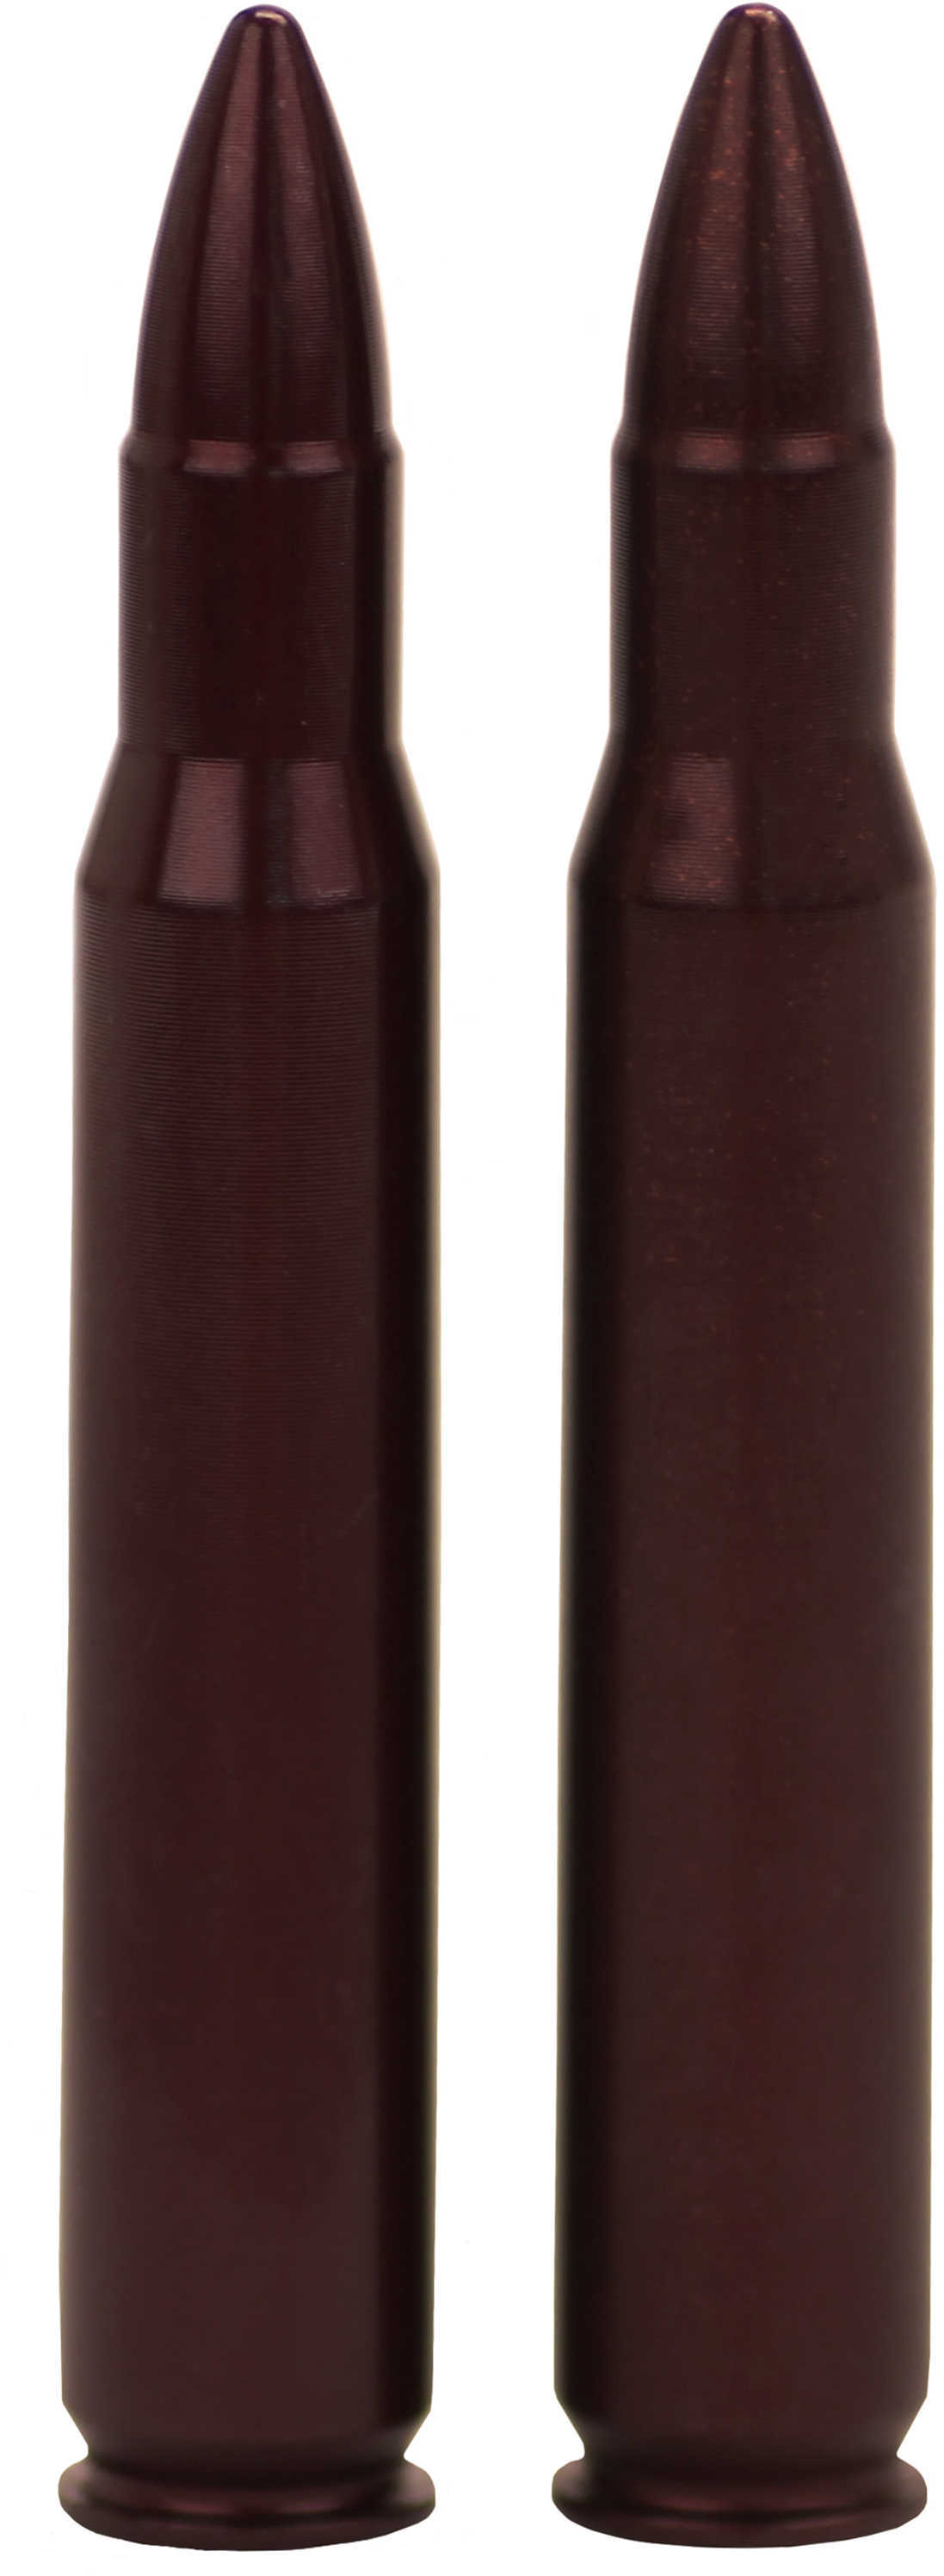 A-Zoom Pachmayr Rifle Metal Snap Caps 30-06 Springfield (Per 2) 12227